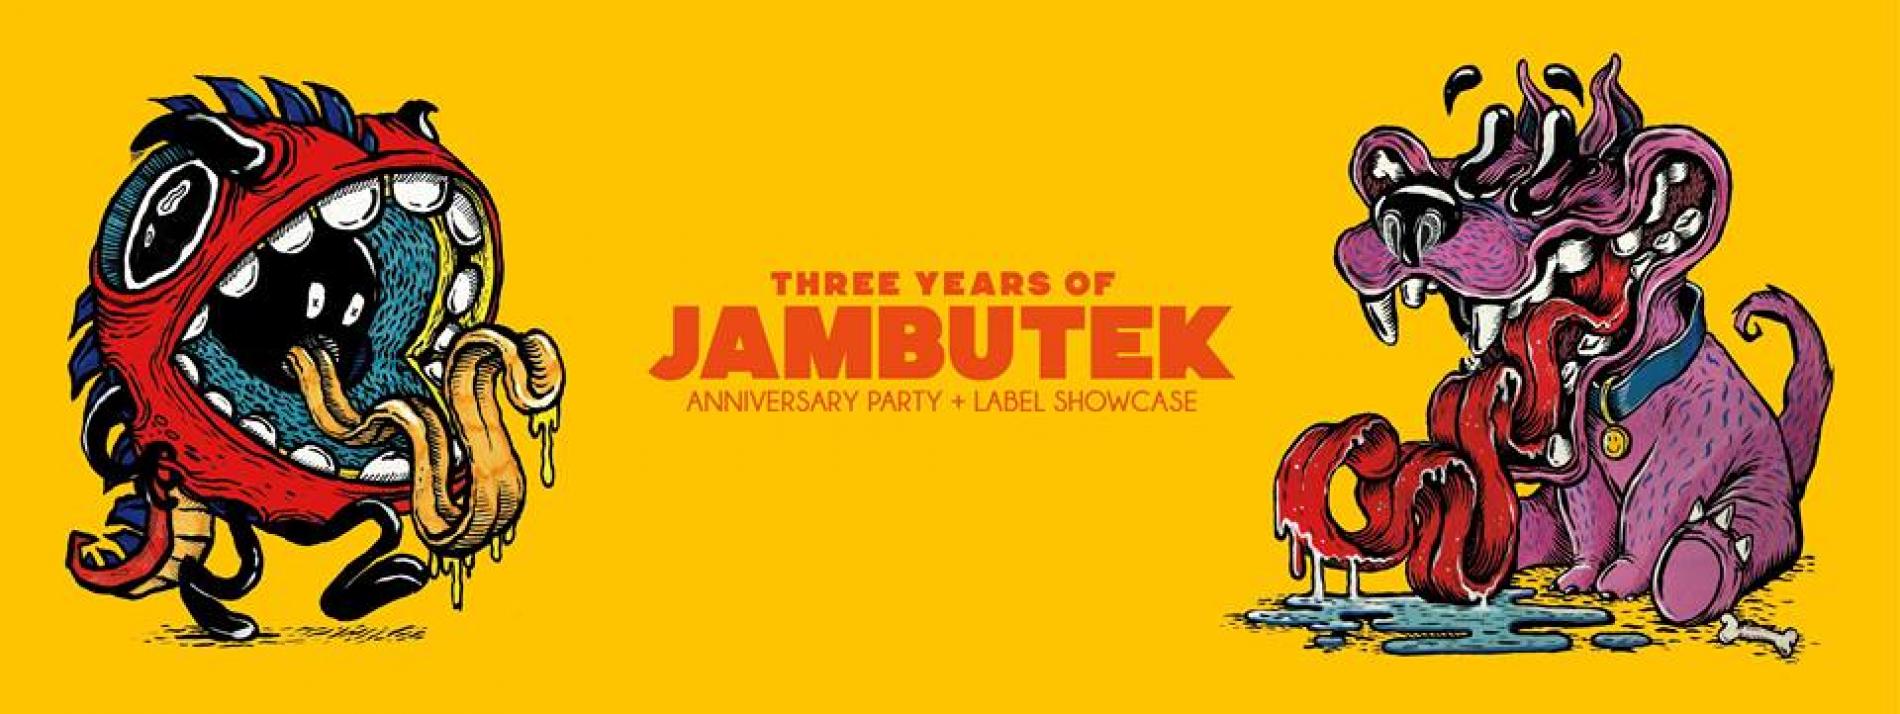 Decibel Exclusive : Moments From The Jambutek Anniversary Party & Label Showcase